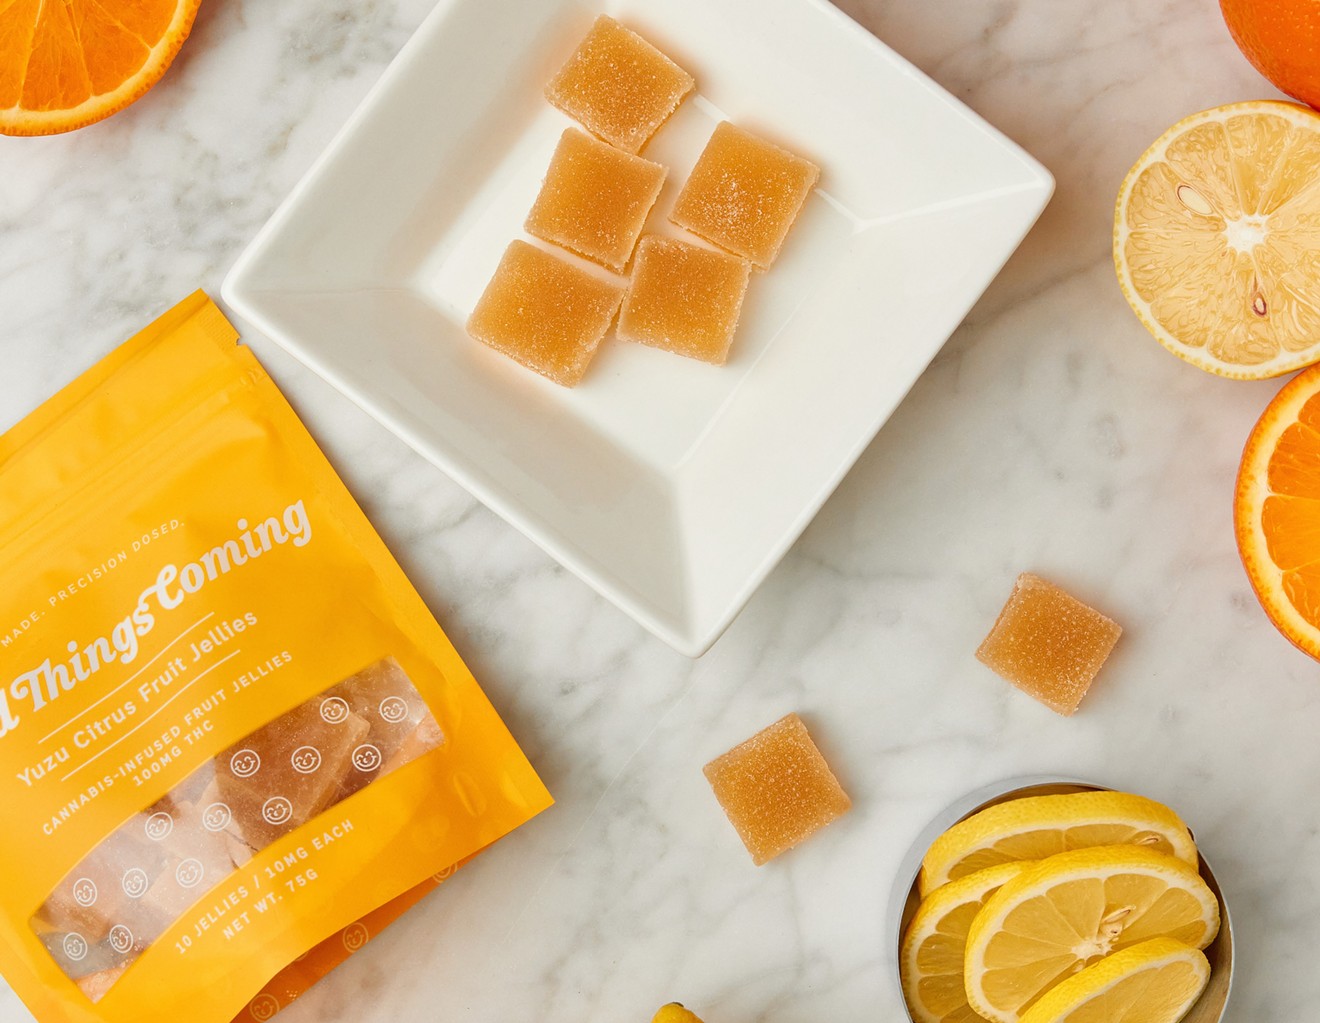 Yuzu citrus gummies are one of two vegan fruit jellies offered by chef Aaron Chamberlin's Good Things Coming brand.